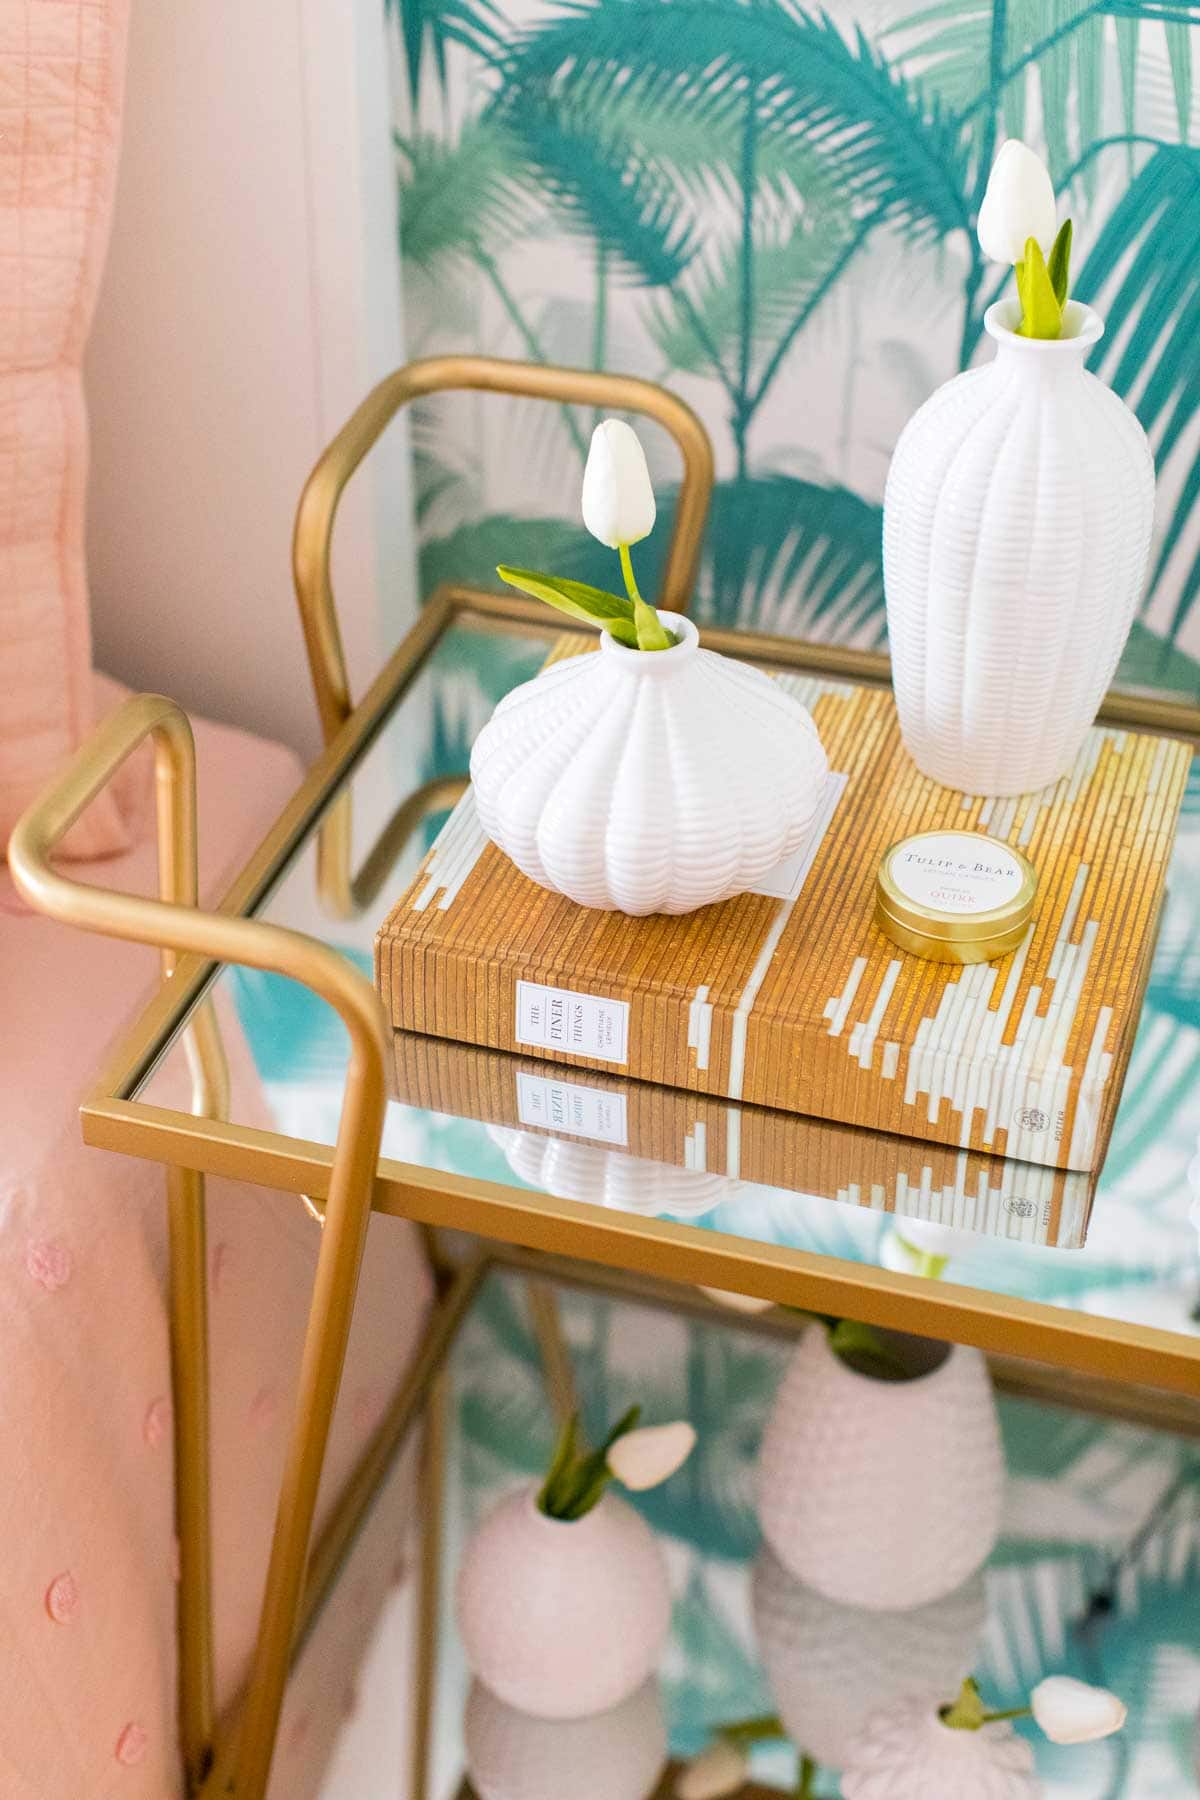 In case you're looking to sell your house fast, I'm sharing a few home staging tips to get you good bang for your buck! by top Houston lifestyle bogger Ashley Rose of sugar & cloth #decor #ideas #design #tips #home